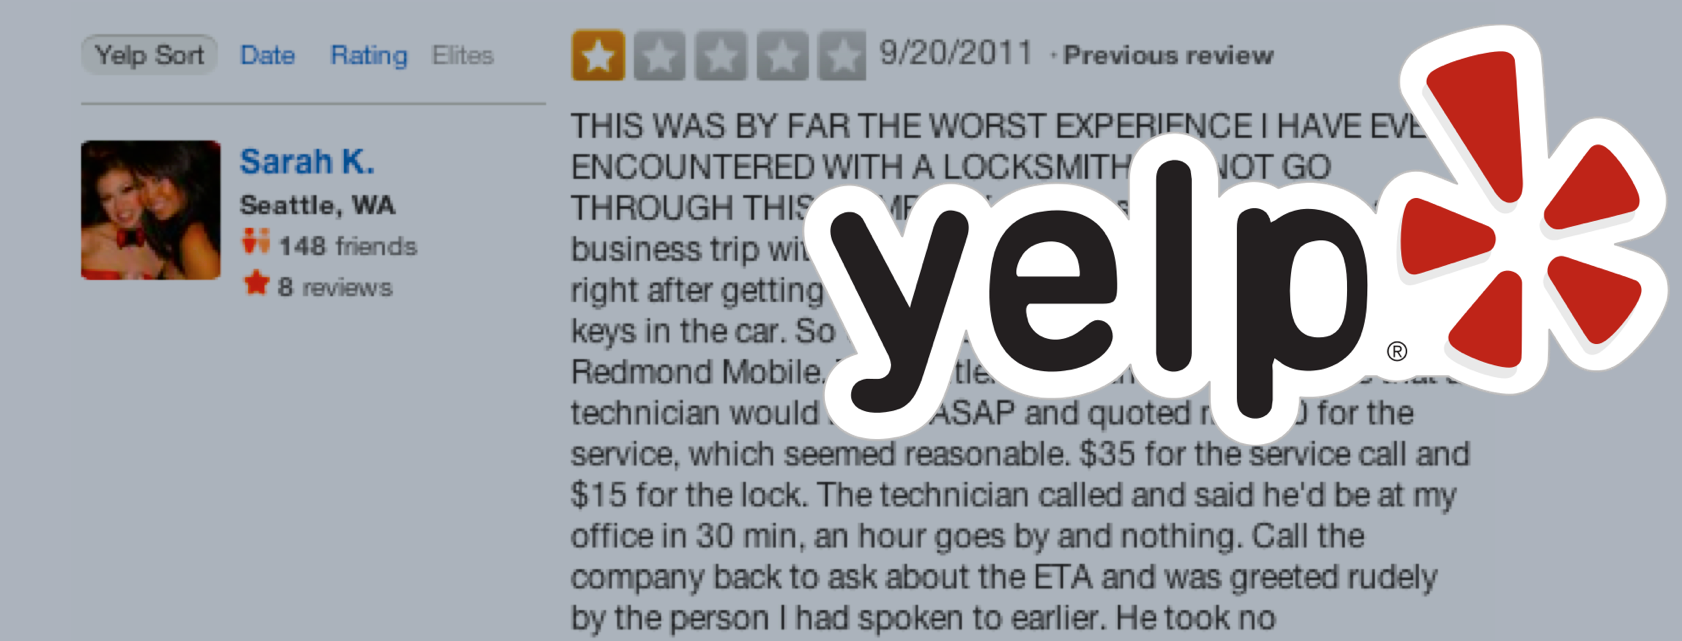 No, Yelp’s Star Ratings Don’t Make It Liable For Bad Reviews